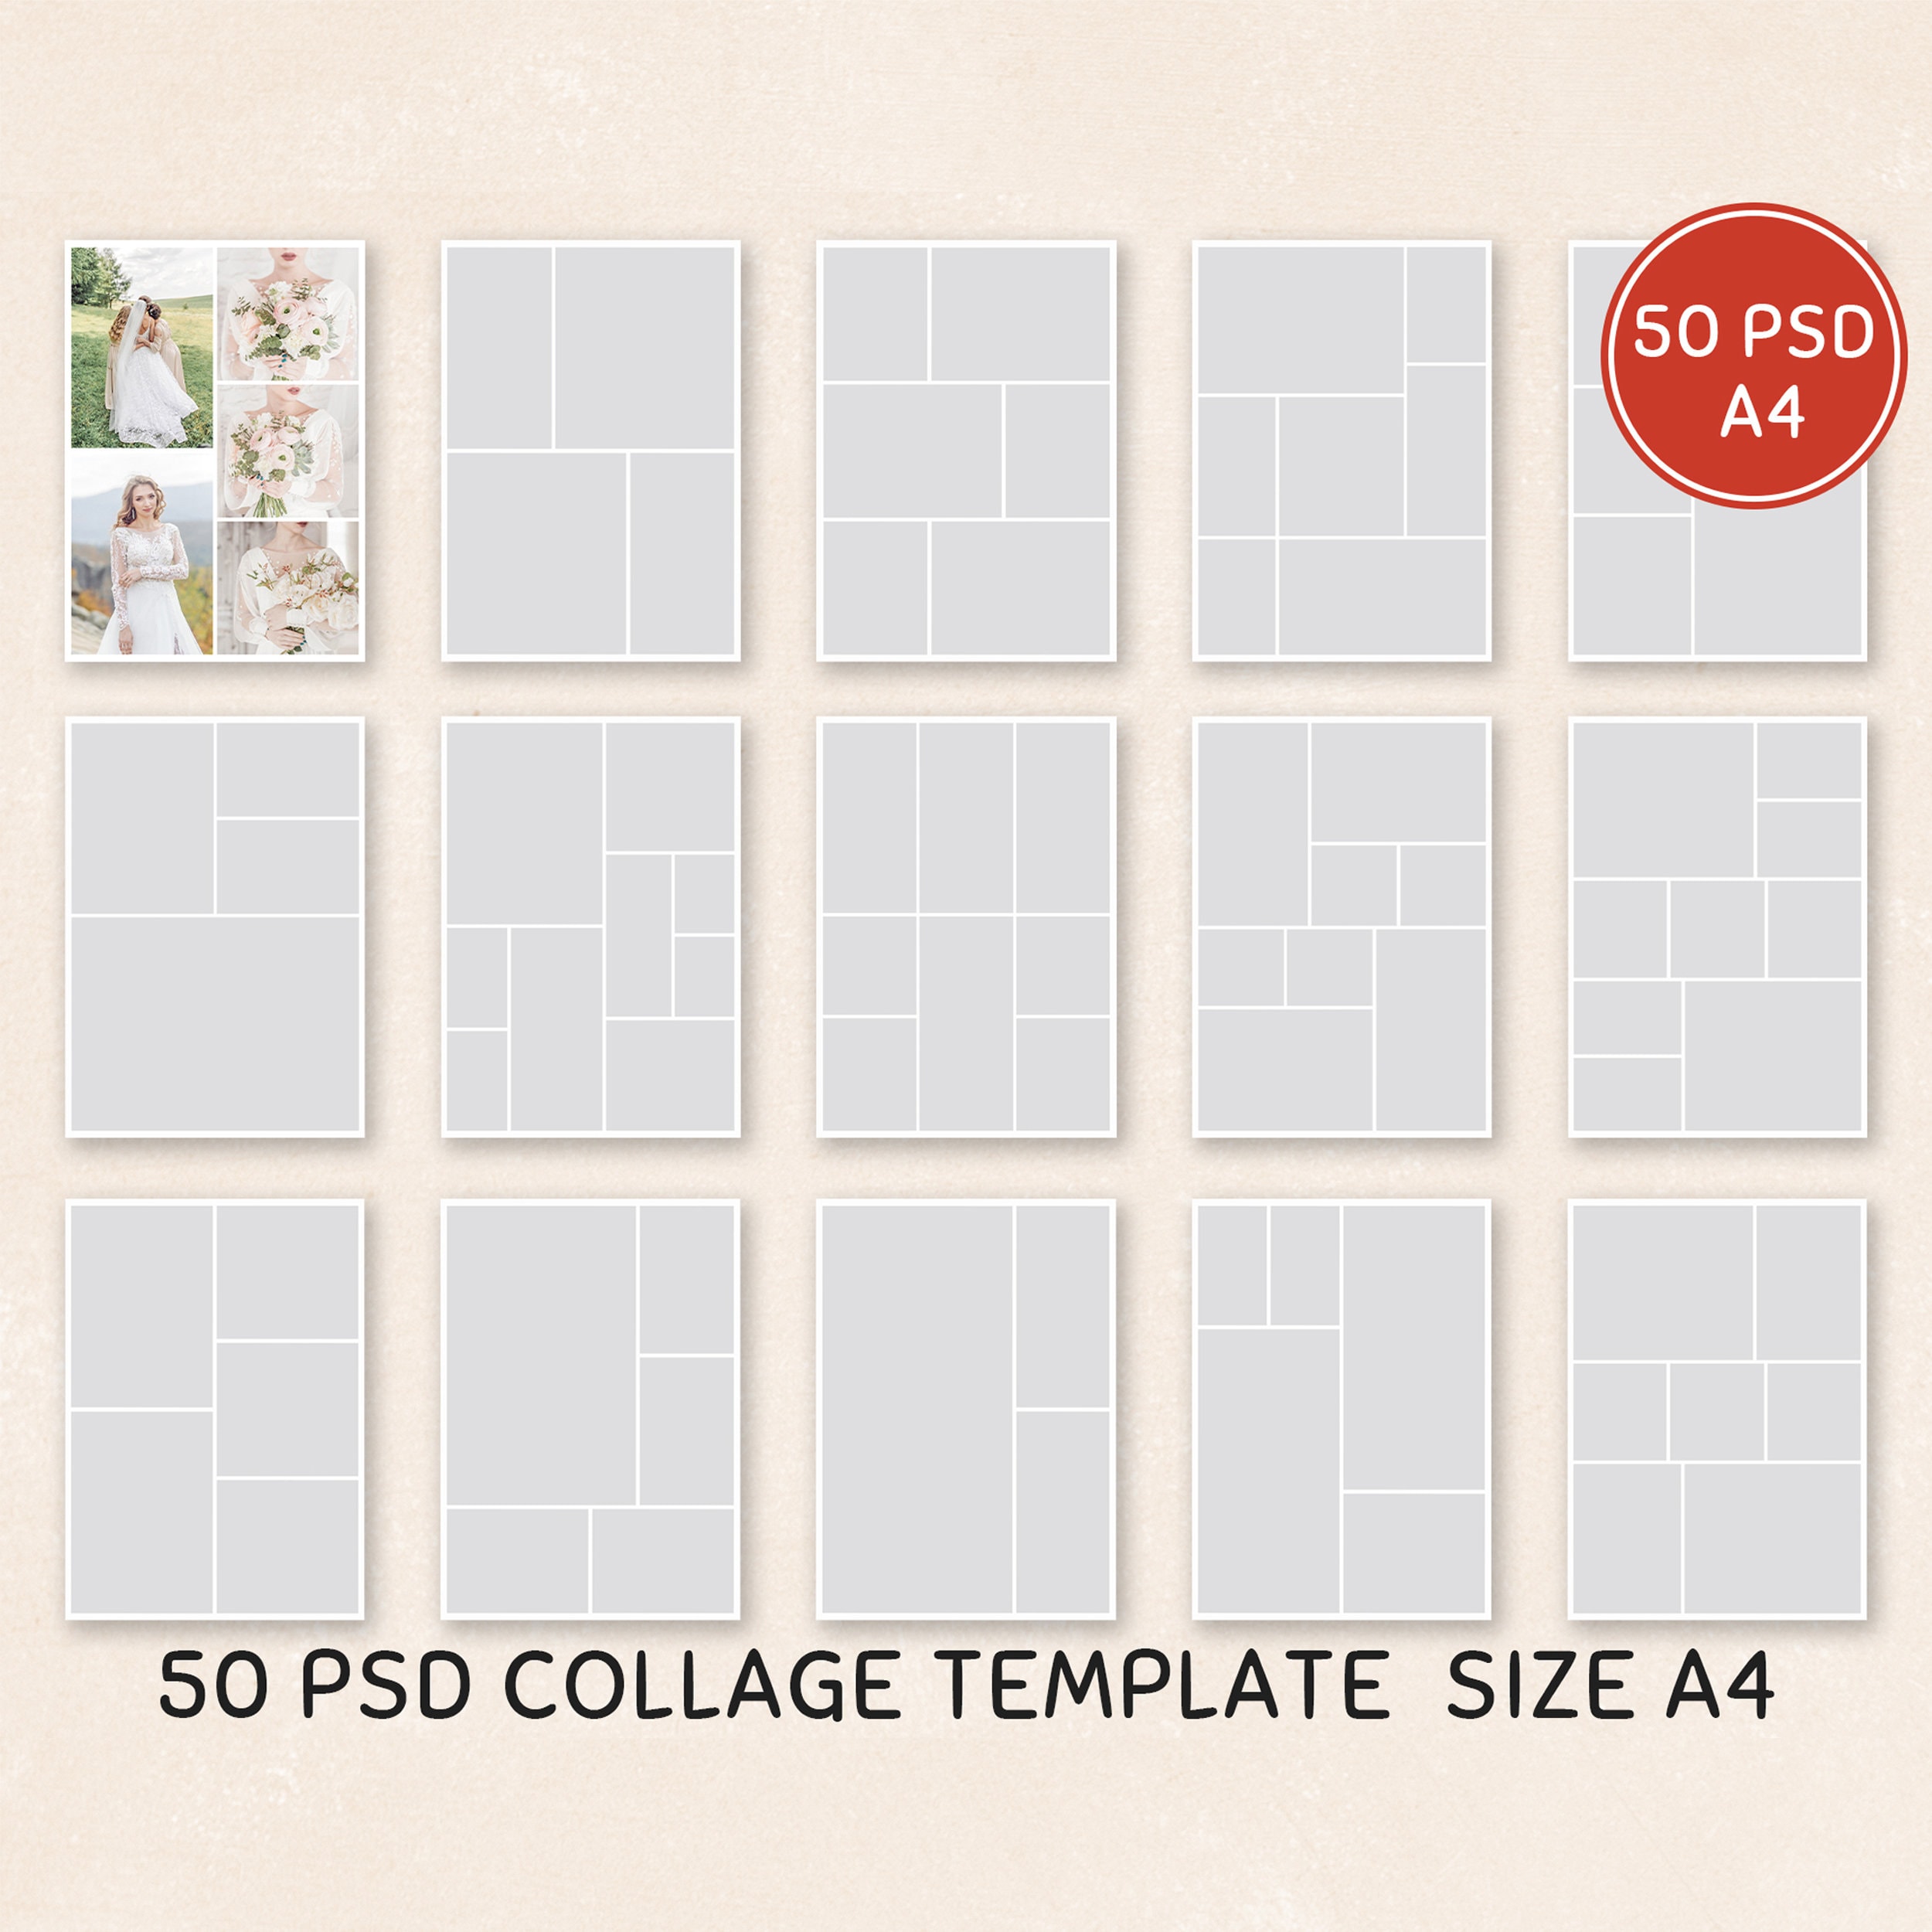 50 A4 Photo Collage Template, Wedding Photo Collage Template, Photo ...